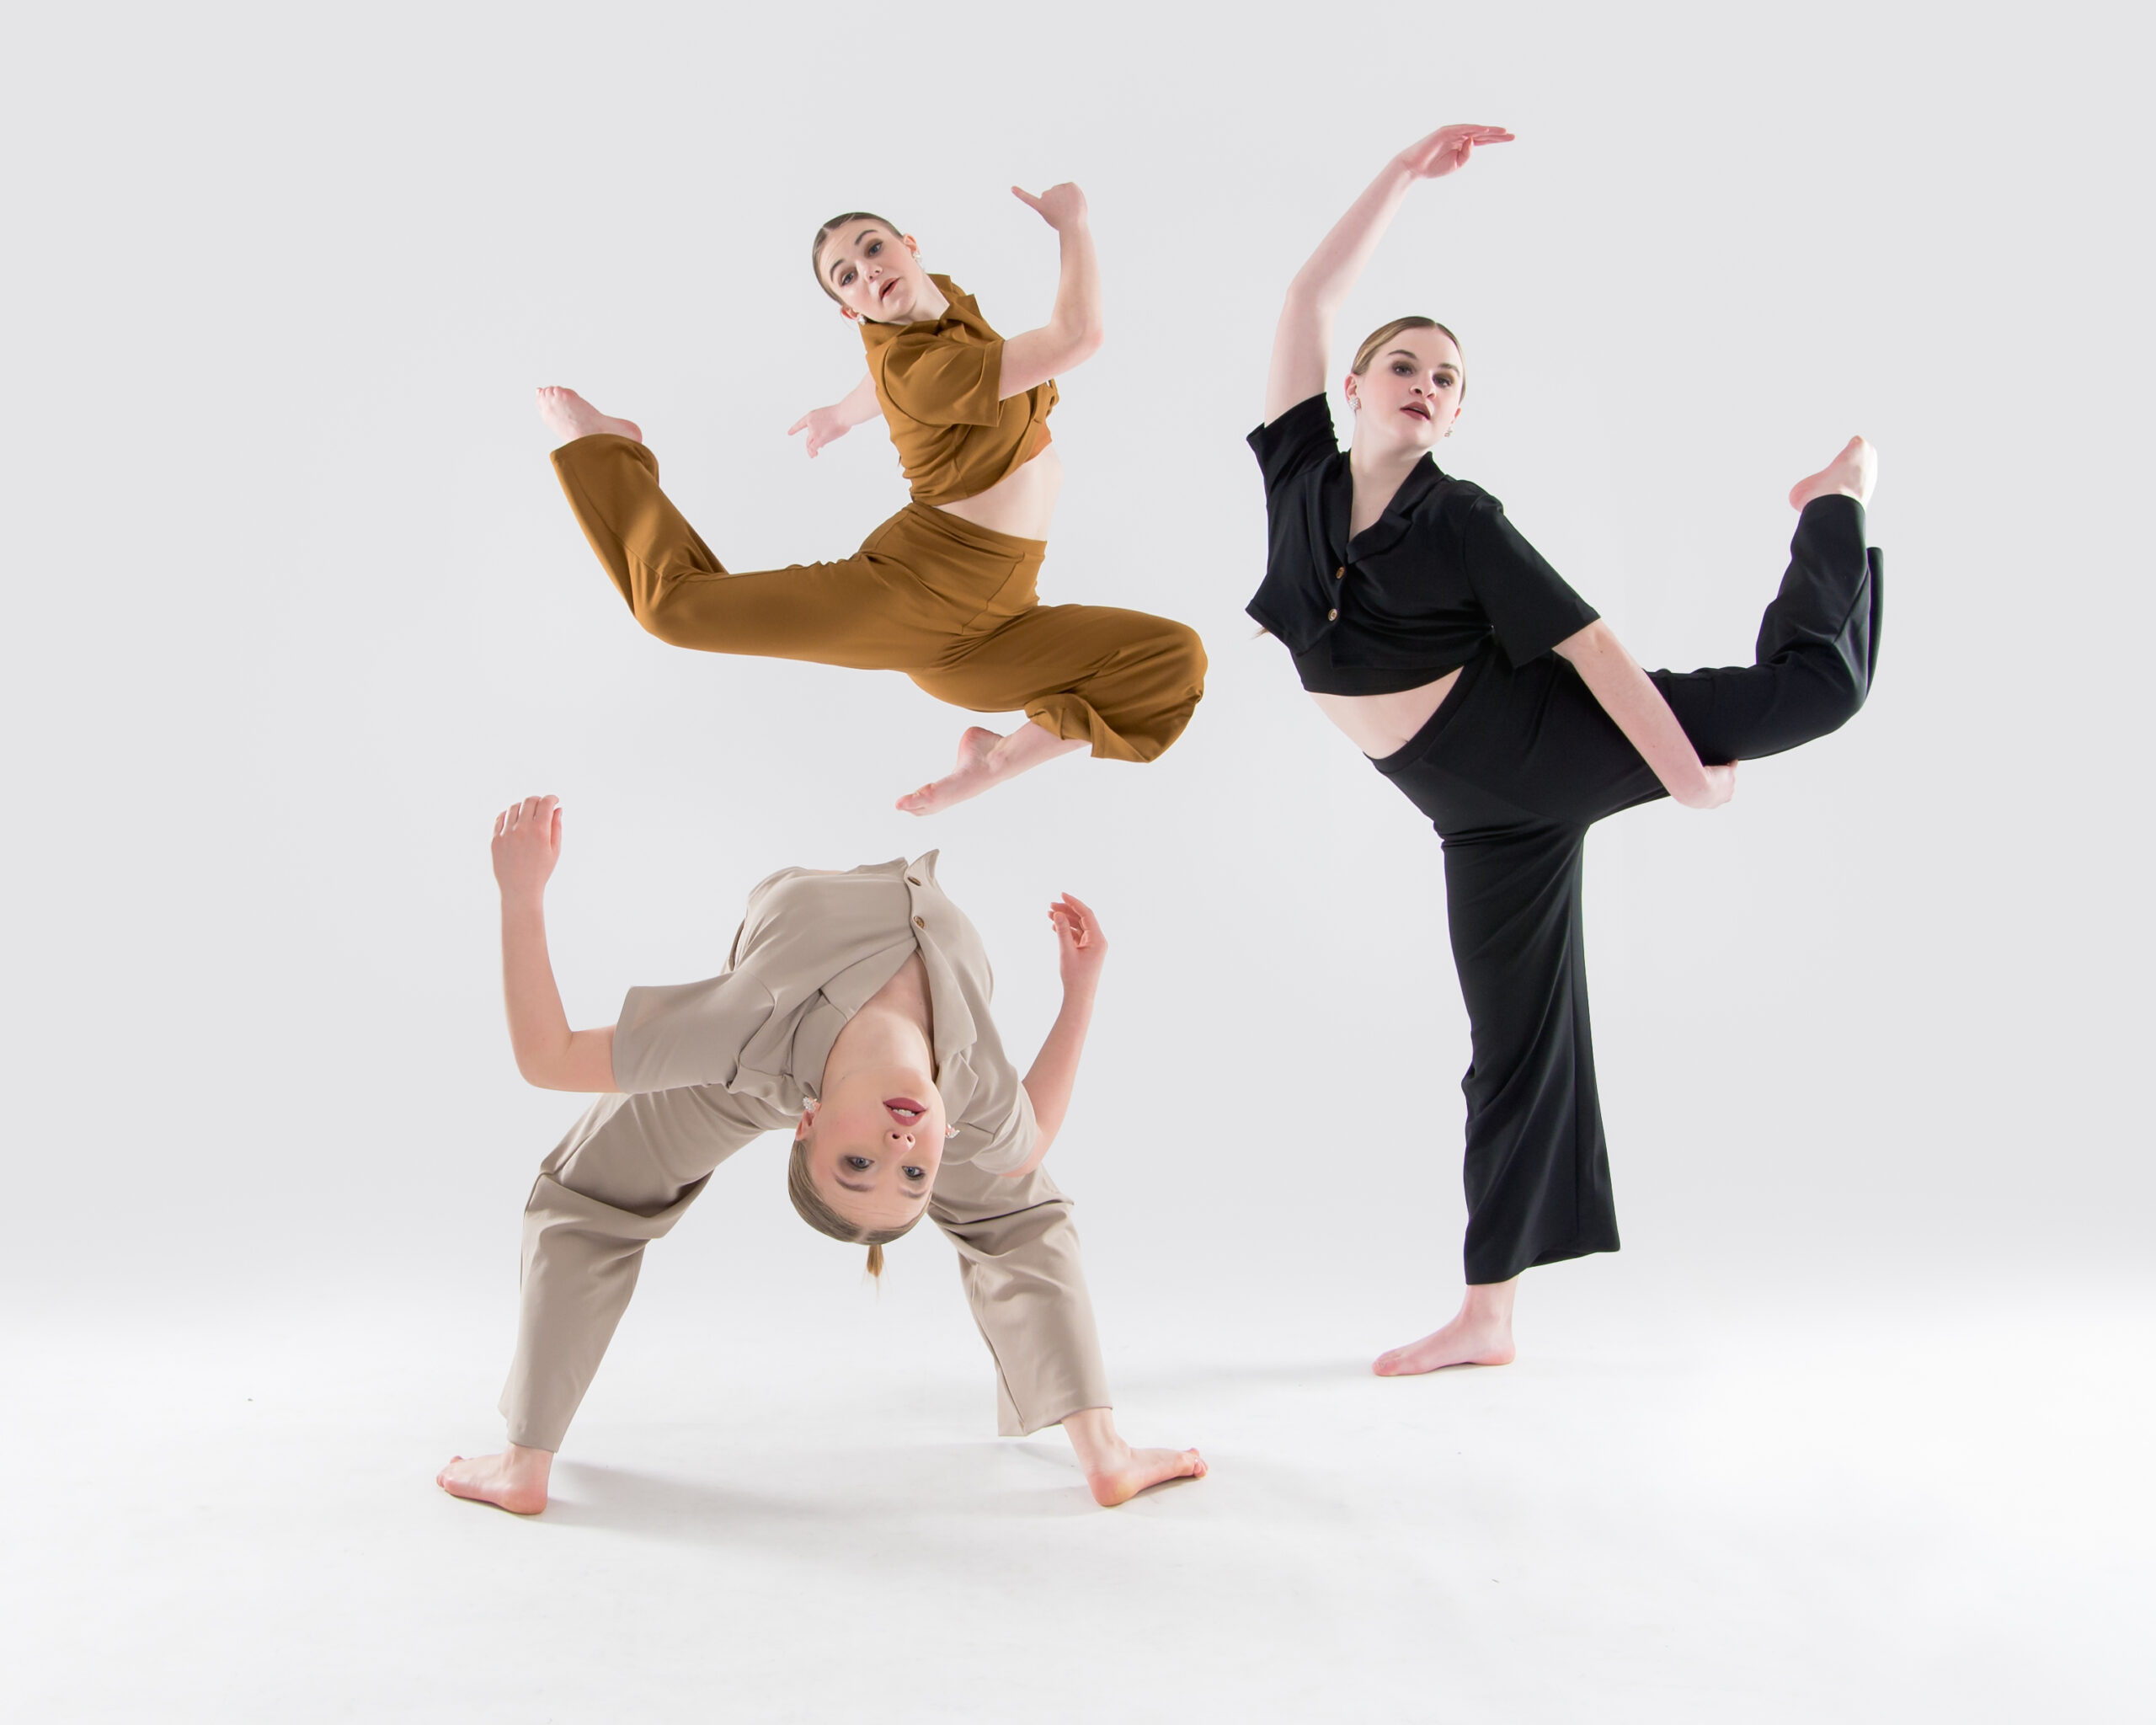 3 dancers, each doing a different pose, in a formation that feels circular